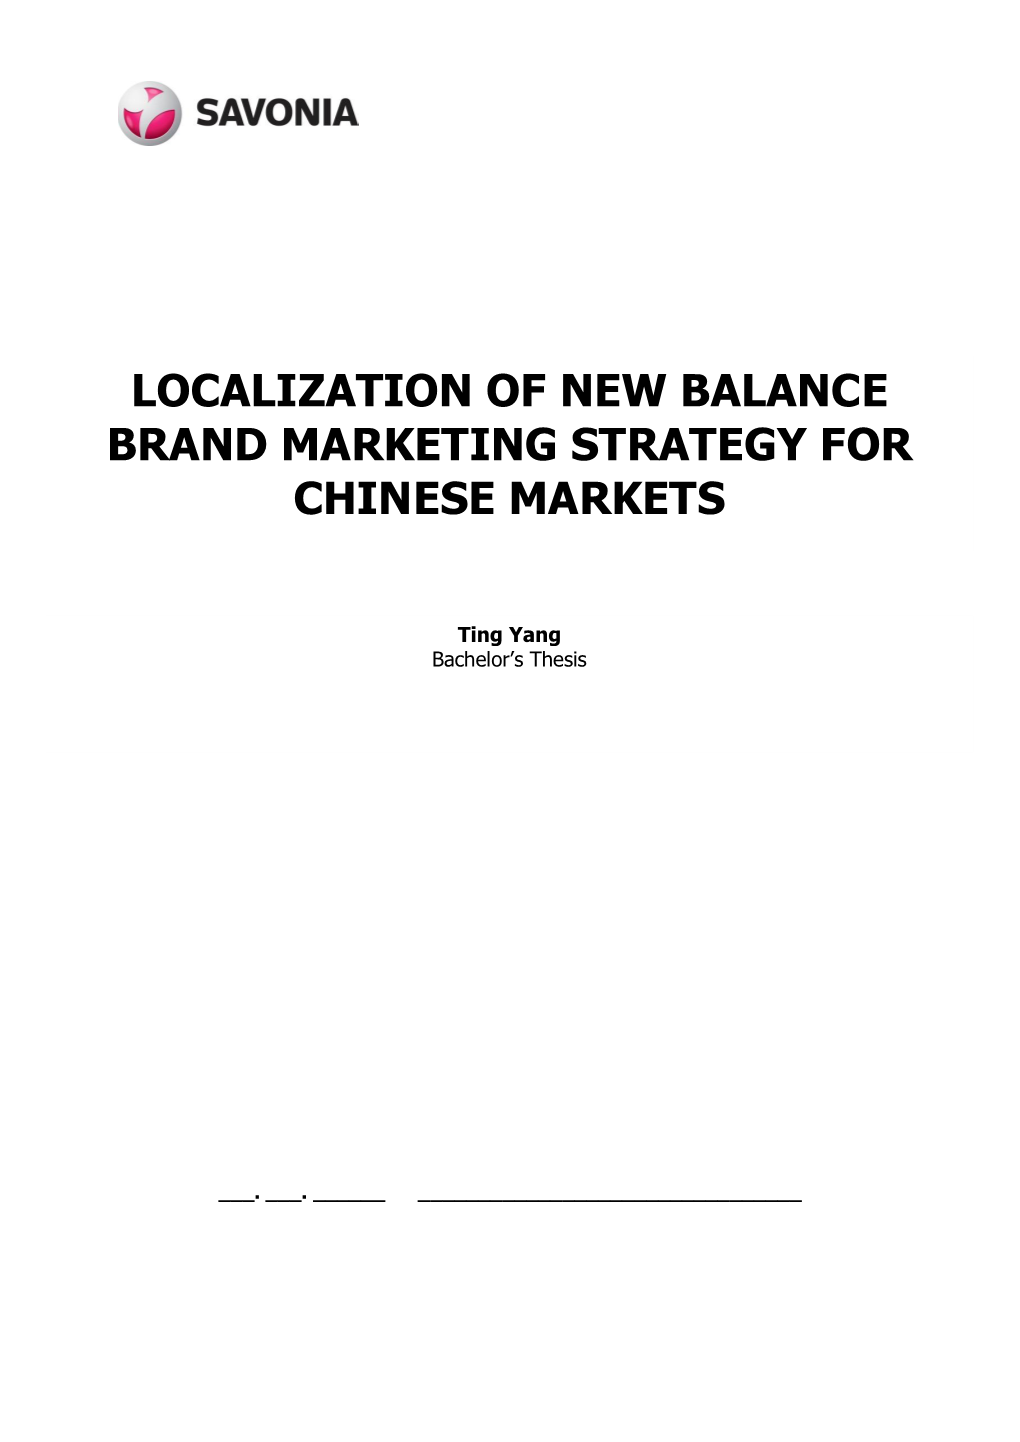 Localization of New Balance Brand Marketing Strategy for Chinese Markets